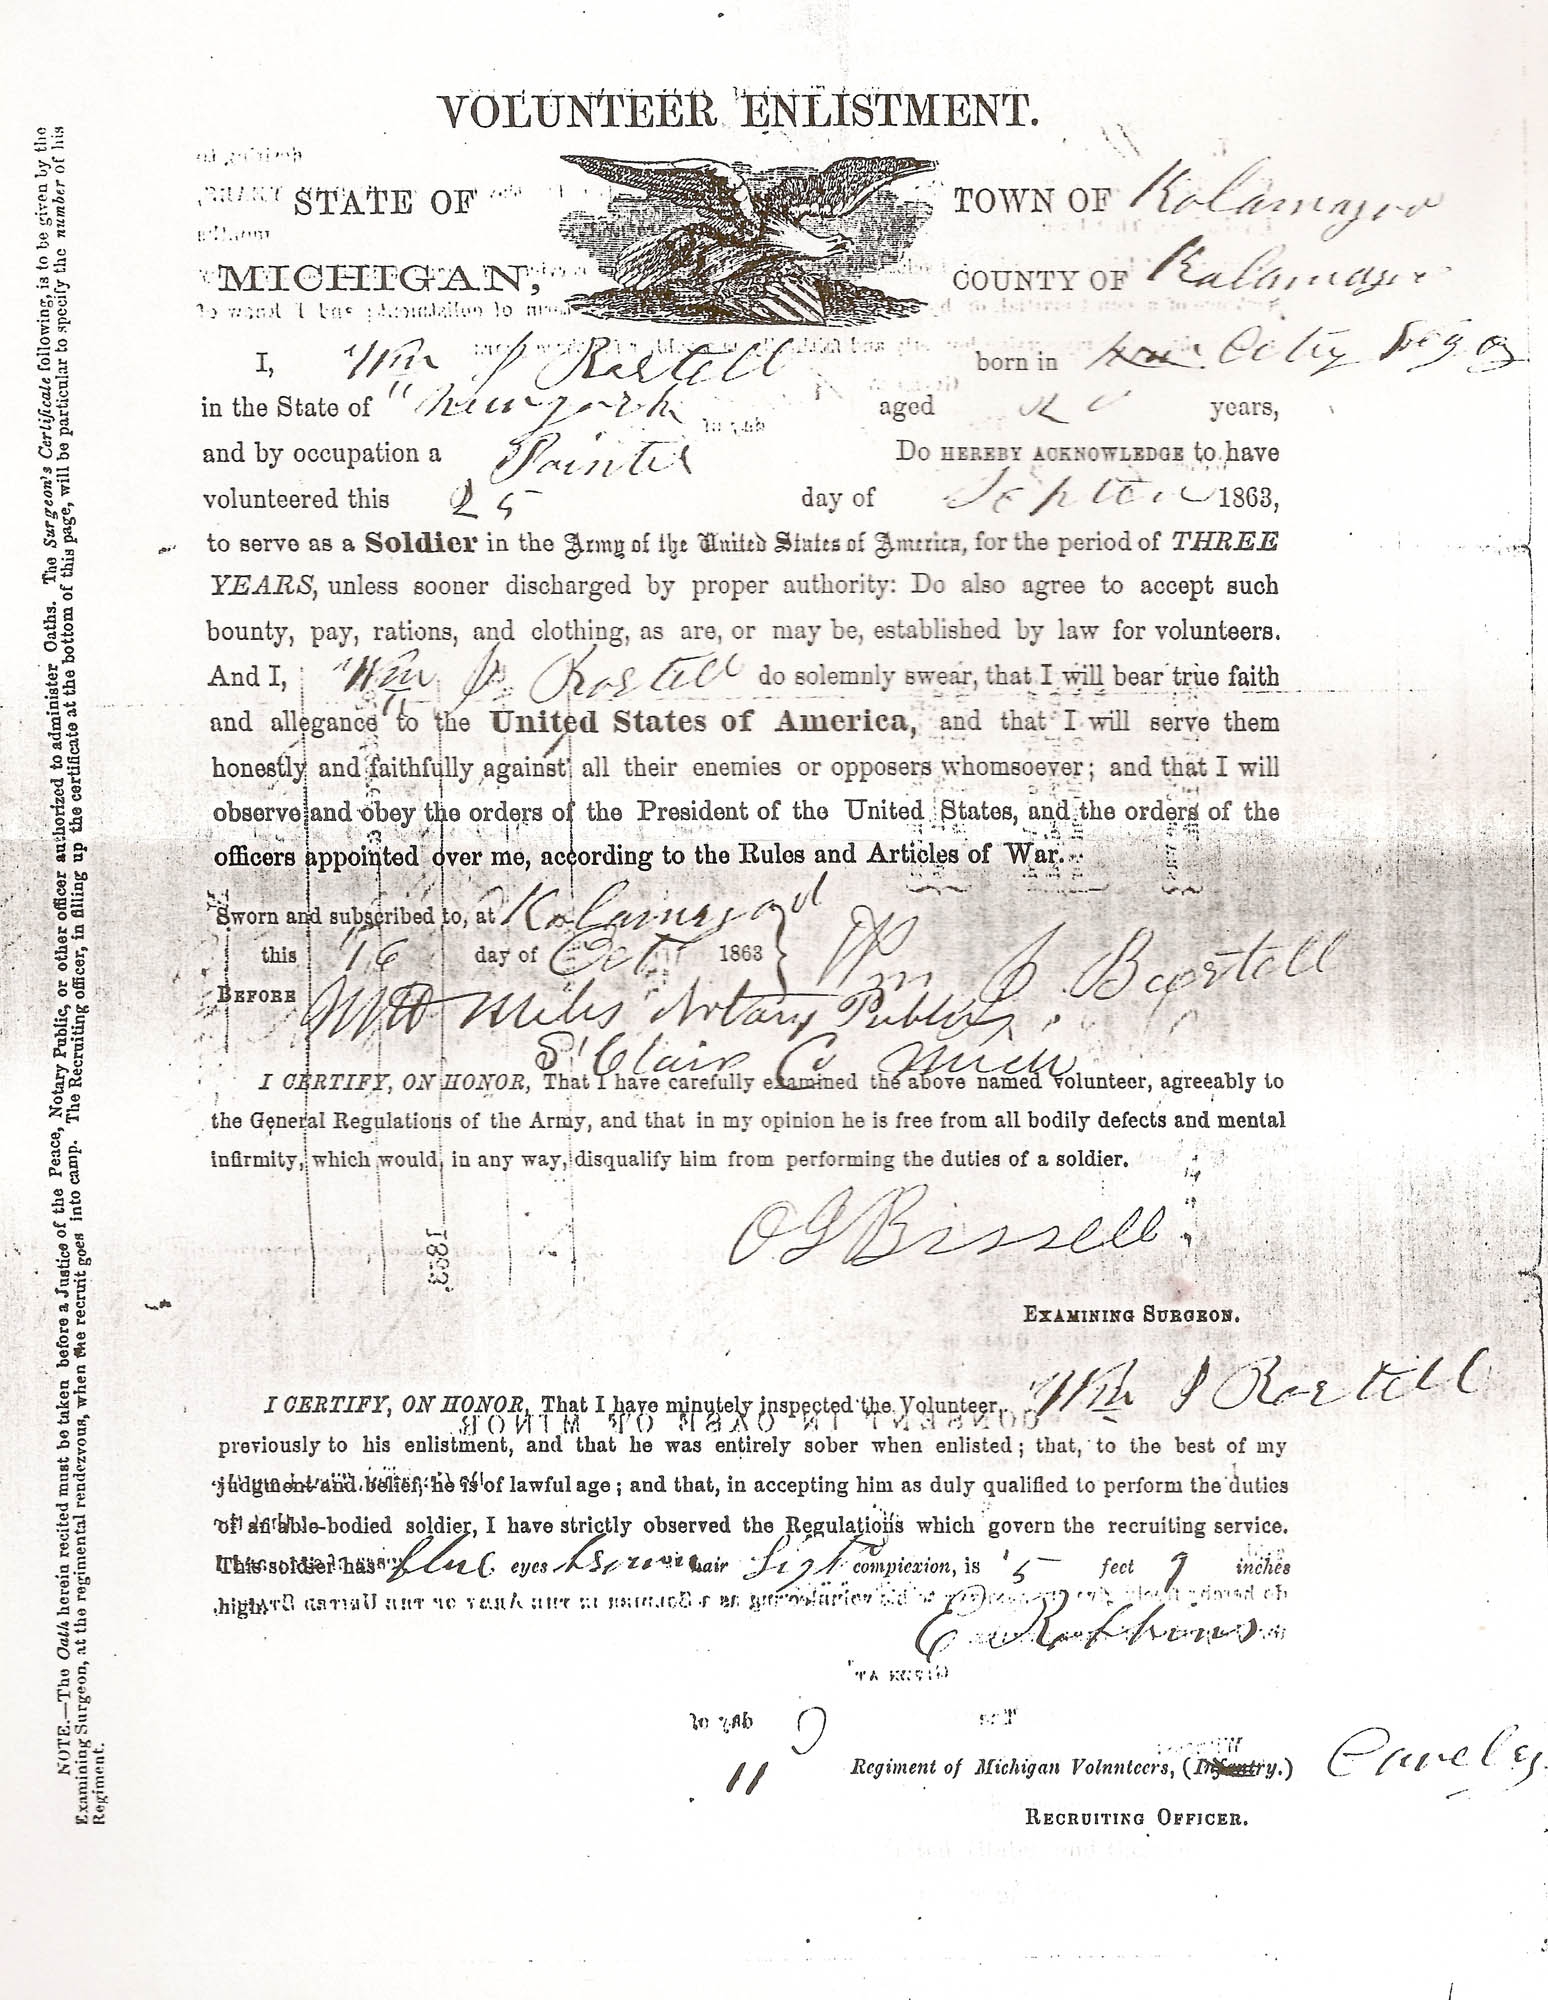 William J. Bartell enlistment papers